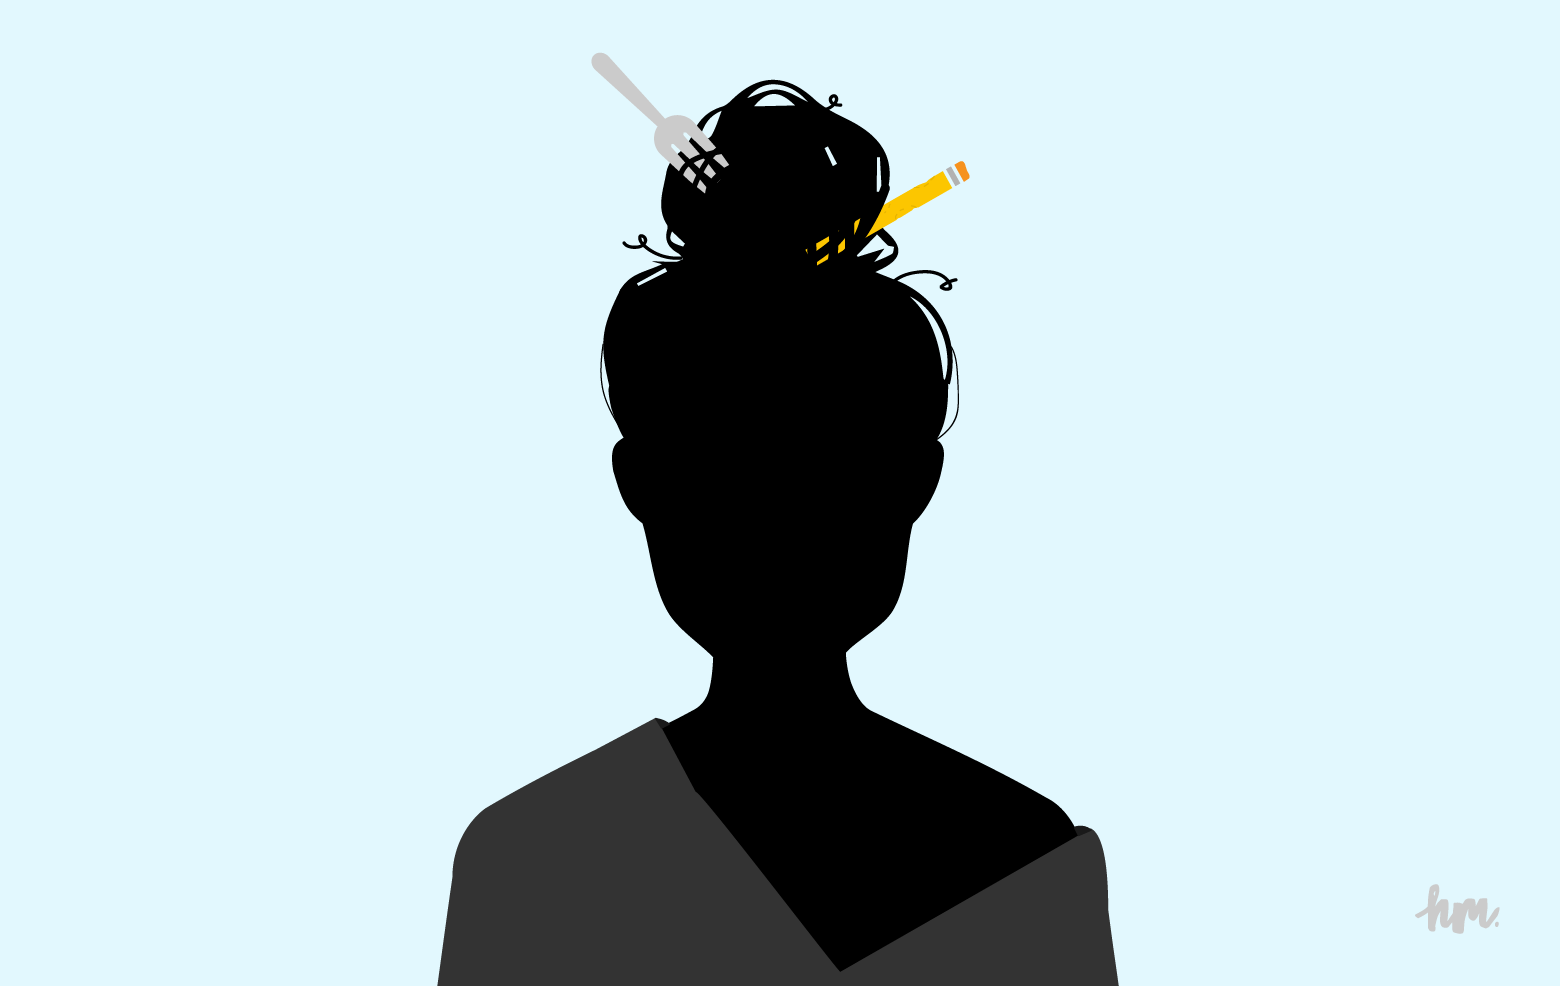 Illustration of a woman's silhouette with a fork and a chewed up pencil stuck into a sloppy top knot of hair.